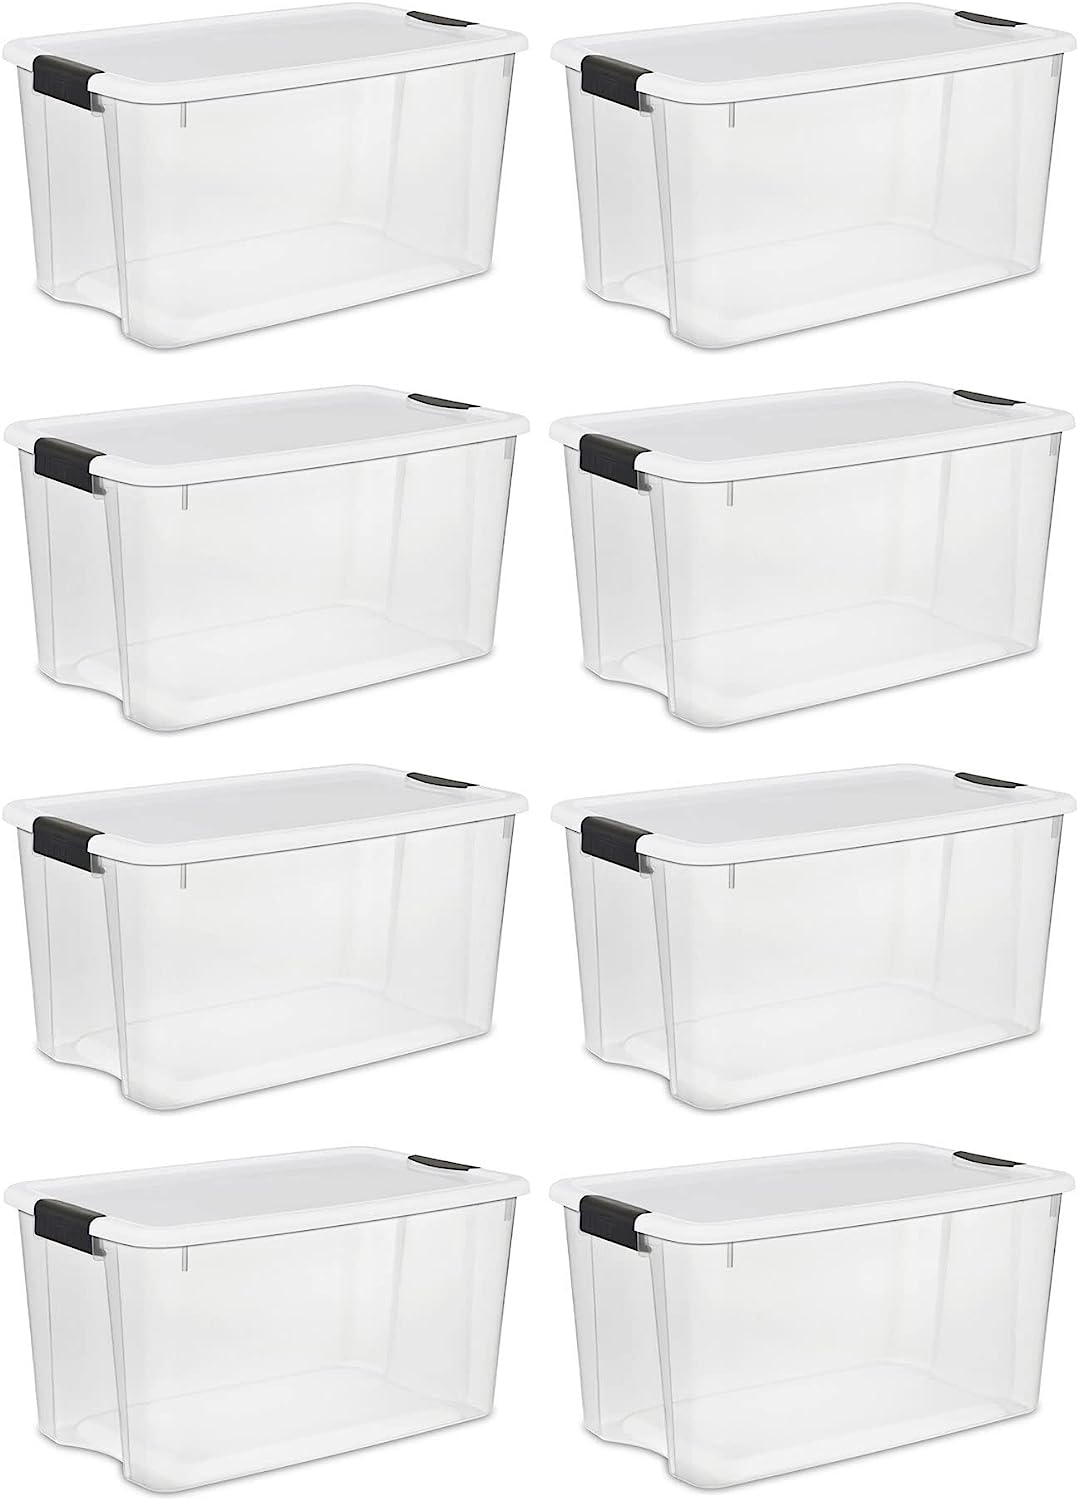 https://bigbigmart.com/wp-content/uploads/2023/06/Sterilite-70-Quart-Clear-Plastic-Stackable-Storage-Container-Bin-Box-Tote-with-White-Latching-Lid-Organizing-Solution-for-Home-Classroom-8-Pack.jpg